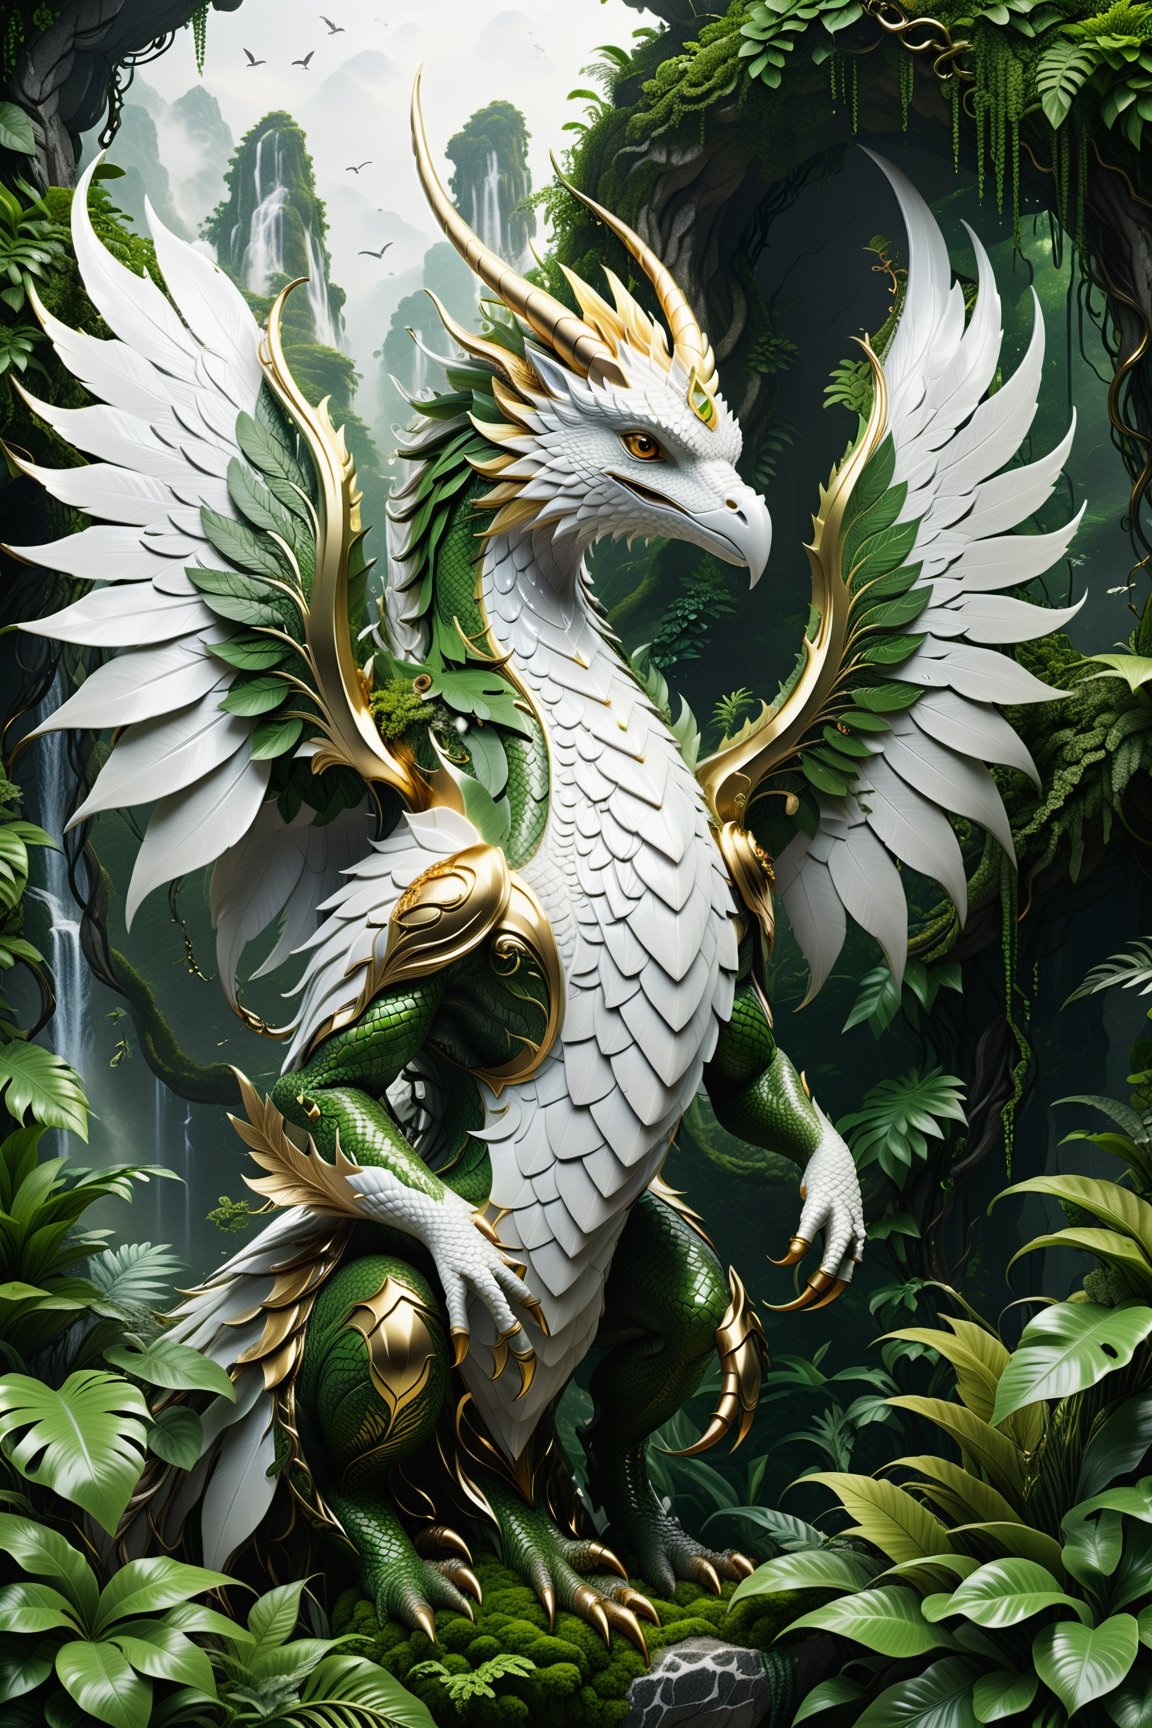 High definition photorealistic render of an incredible and mysterious futuristic mythical creature with scales, hair, dragon wings and bird feathers, with parametric shape and structure in the word, curved and fluid shapes in a thick jungle full of a lot of vegetation and trees with vines and rocks with moss, in white marble with intricate gold details, luxurious details and parametric architectural style in marble and metal, epic pose
​